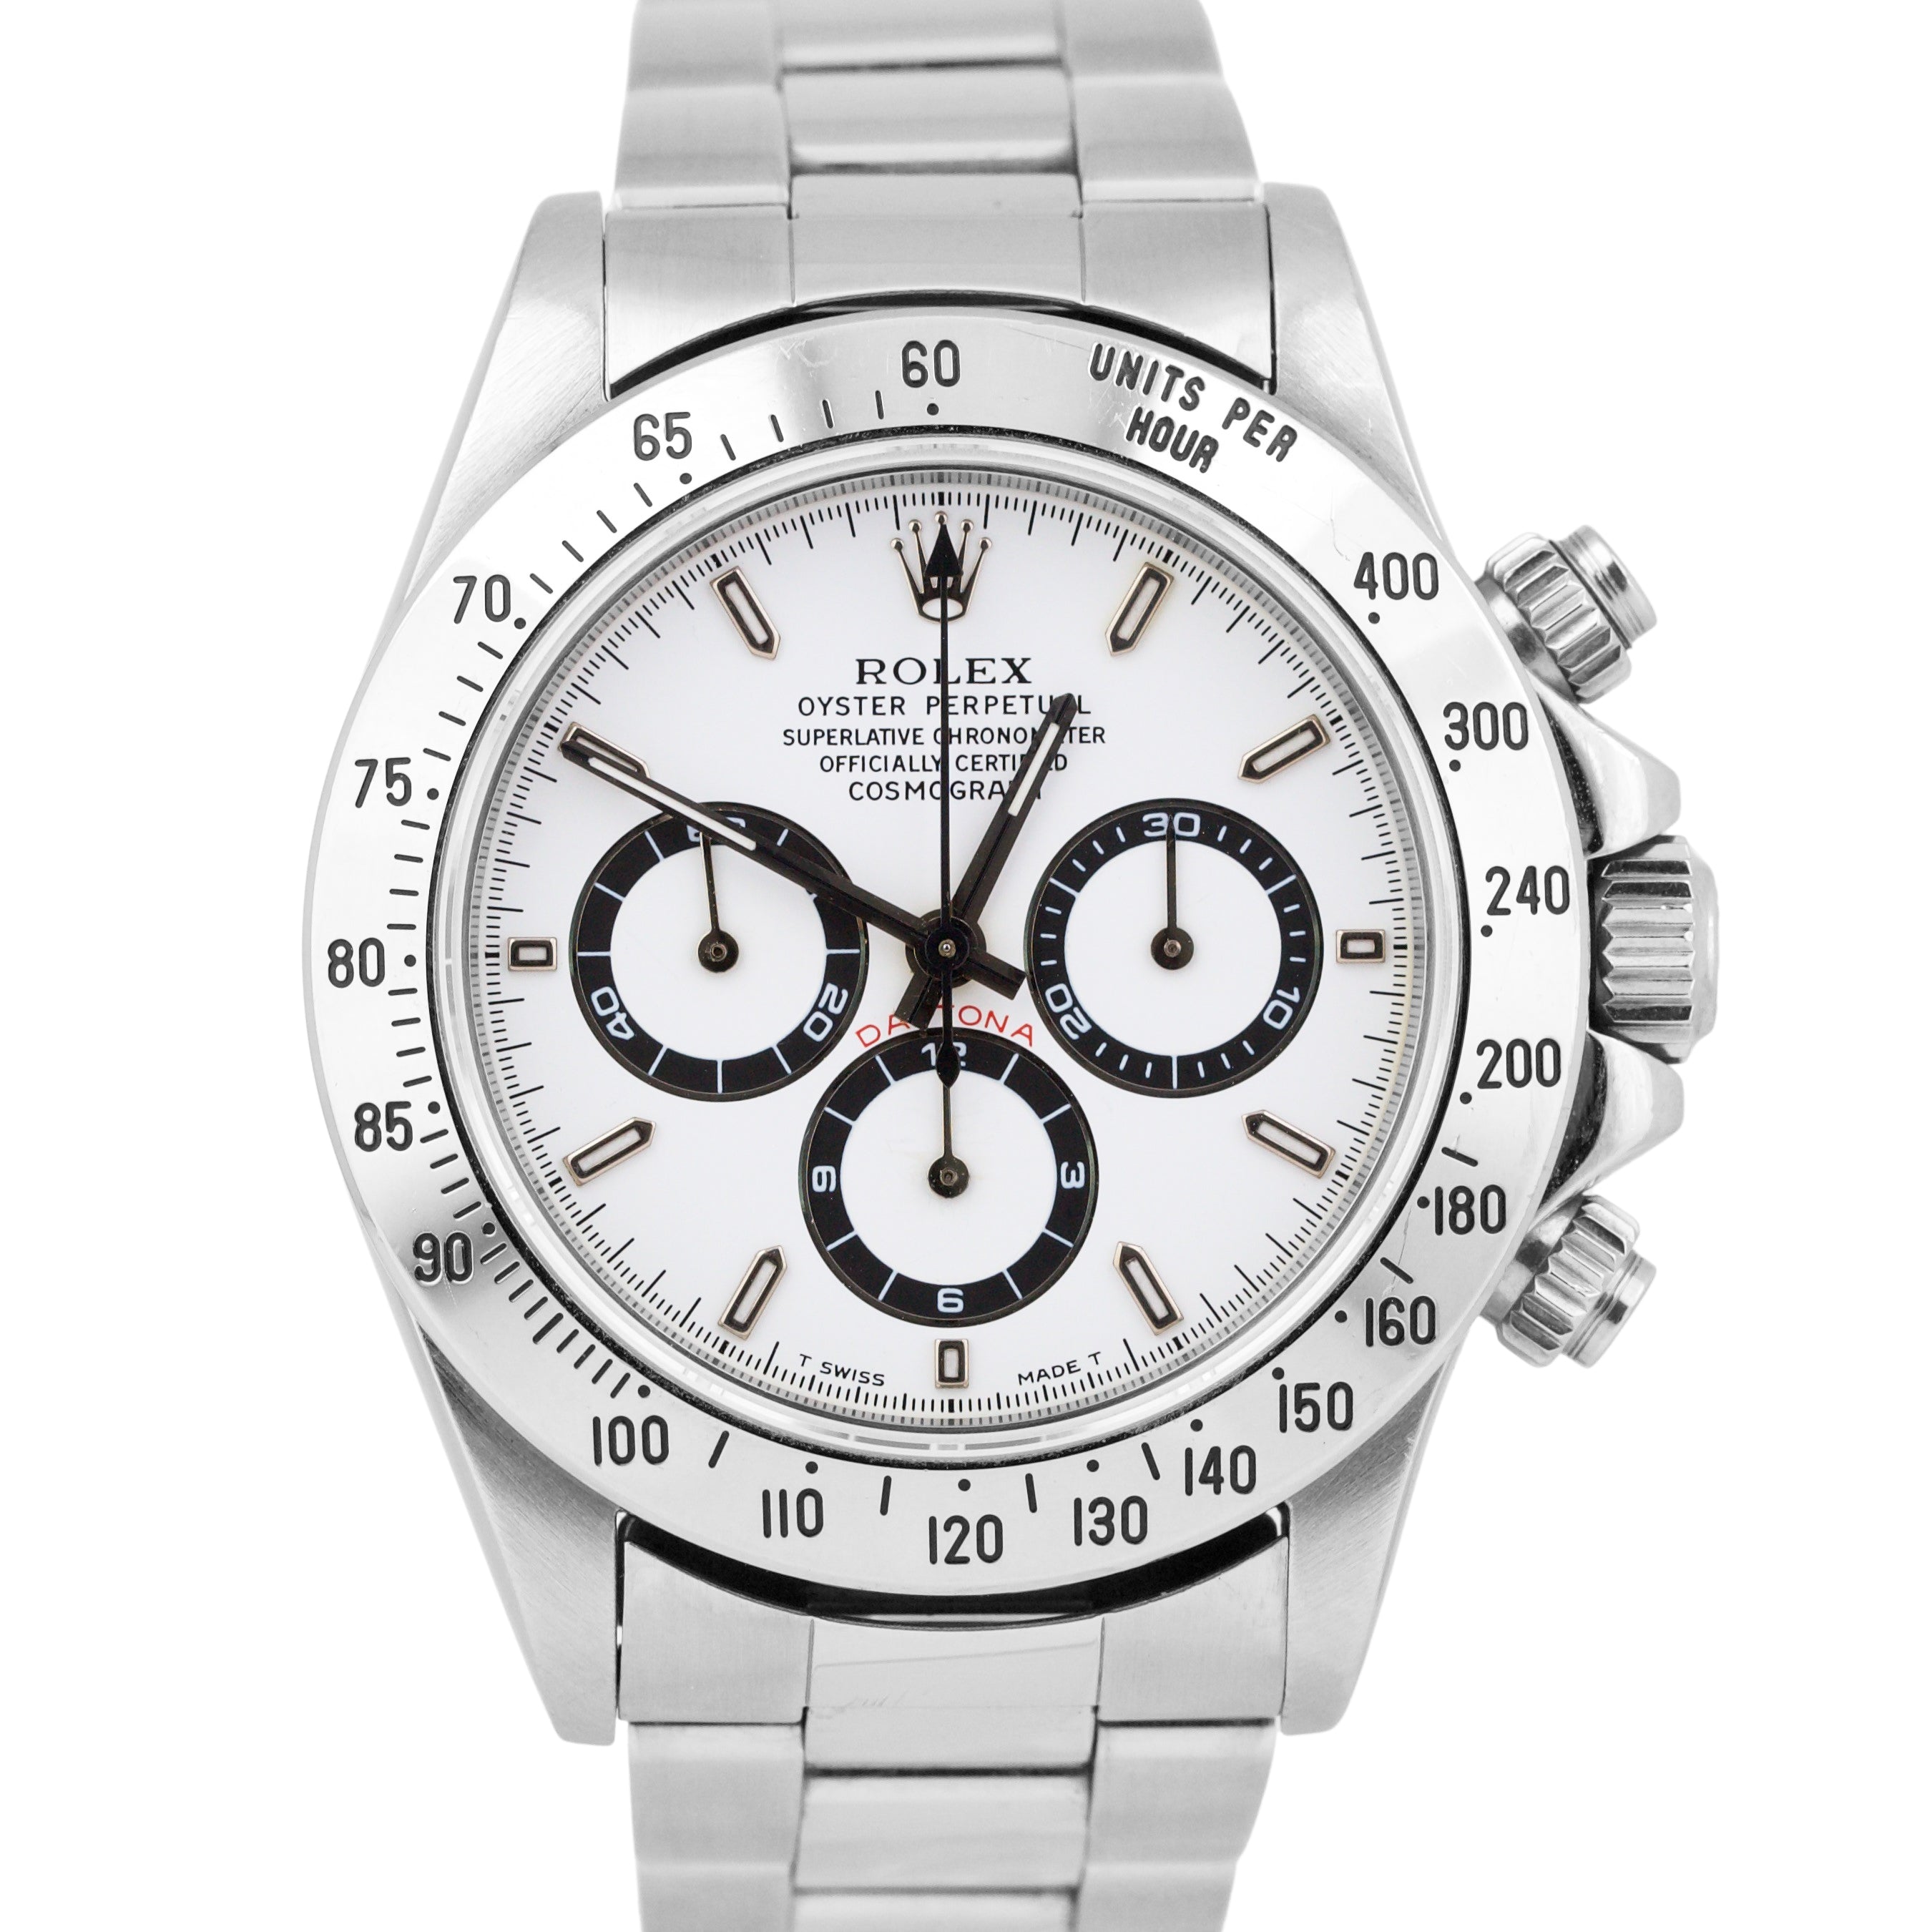 PAPERS Rolex Daytona Cosmograph White ZENITH Stainless Steel 40mm 1652